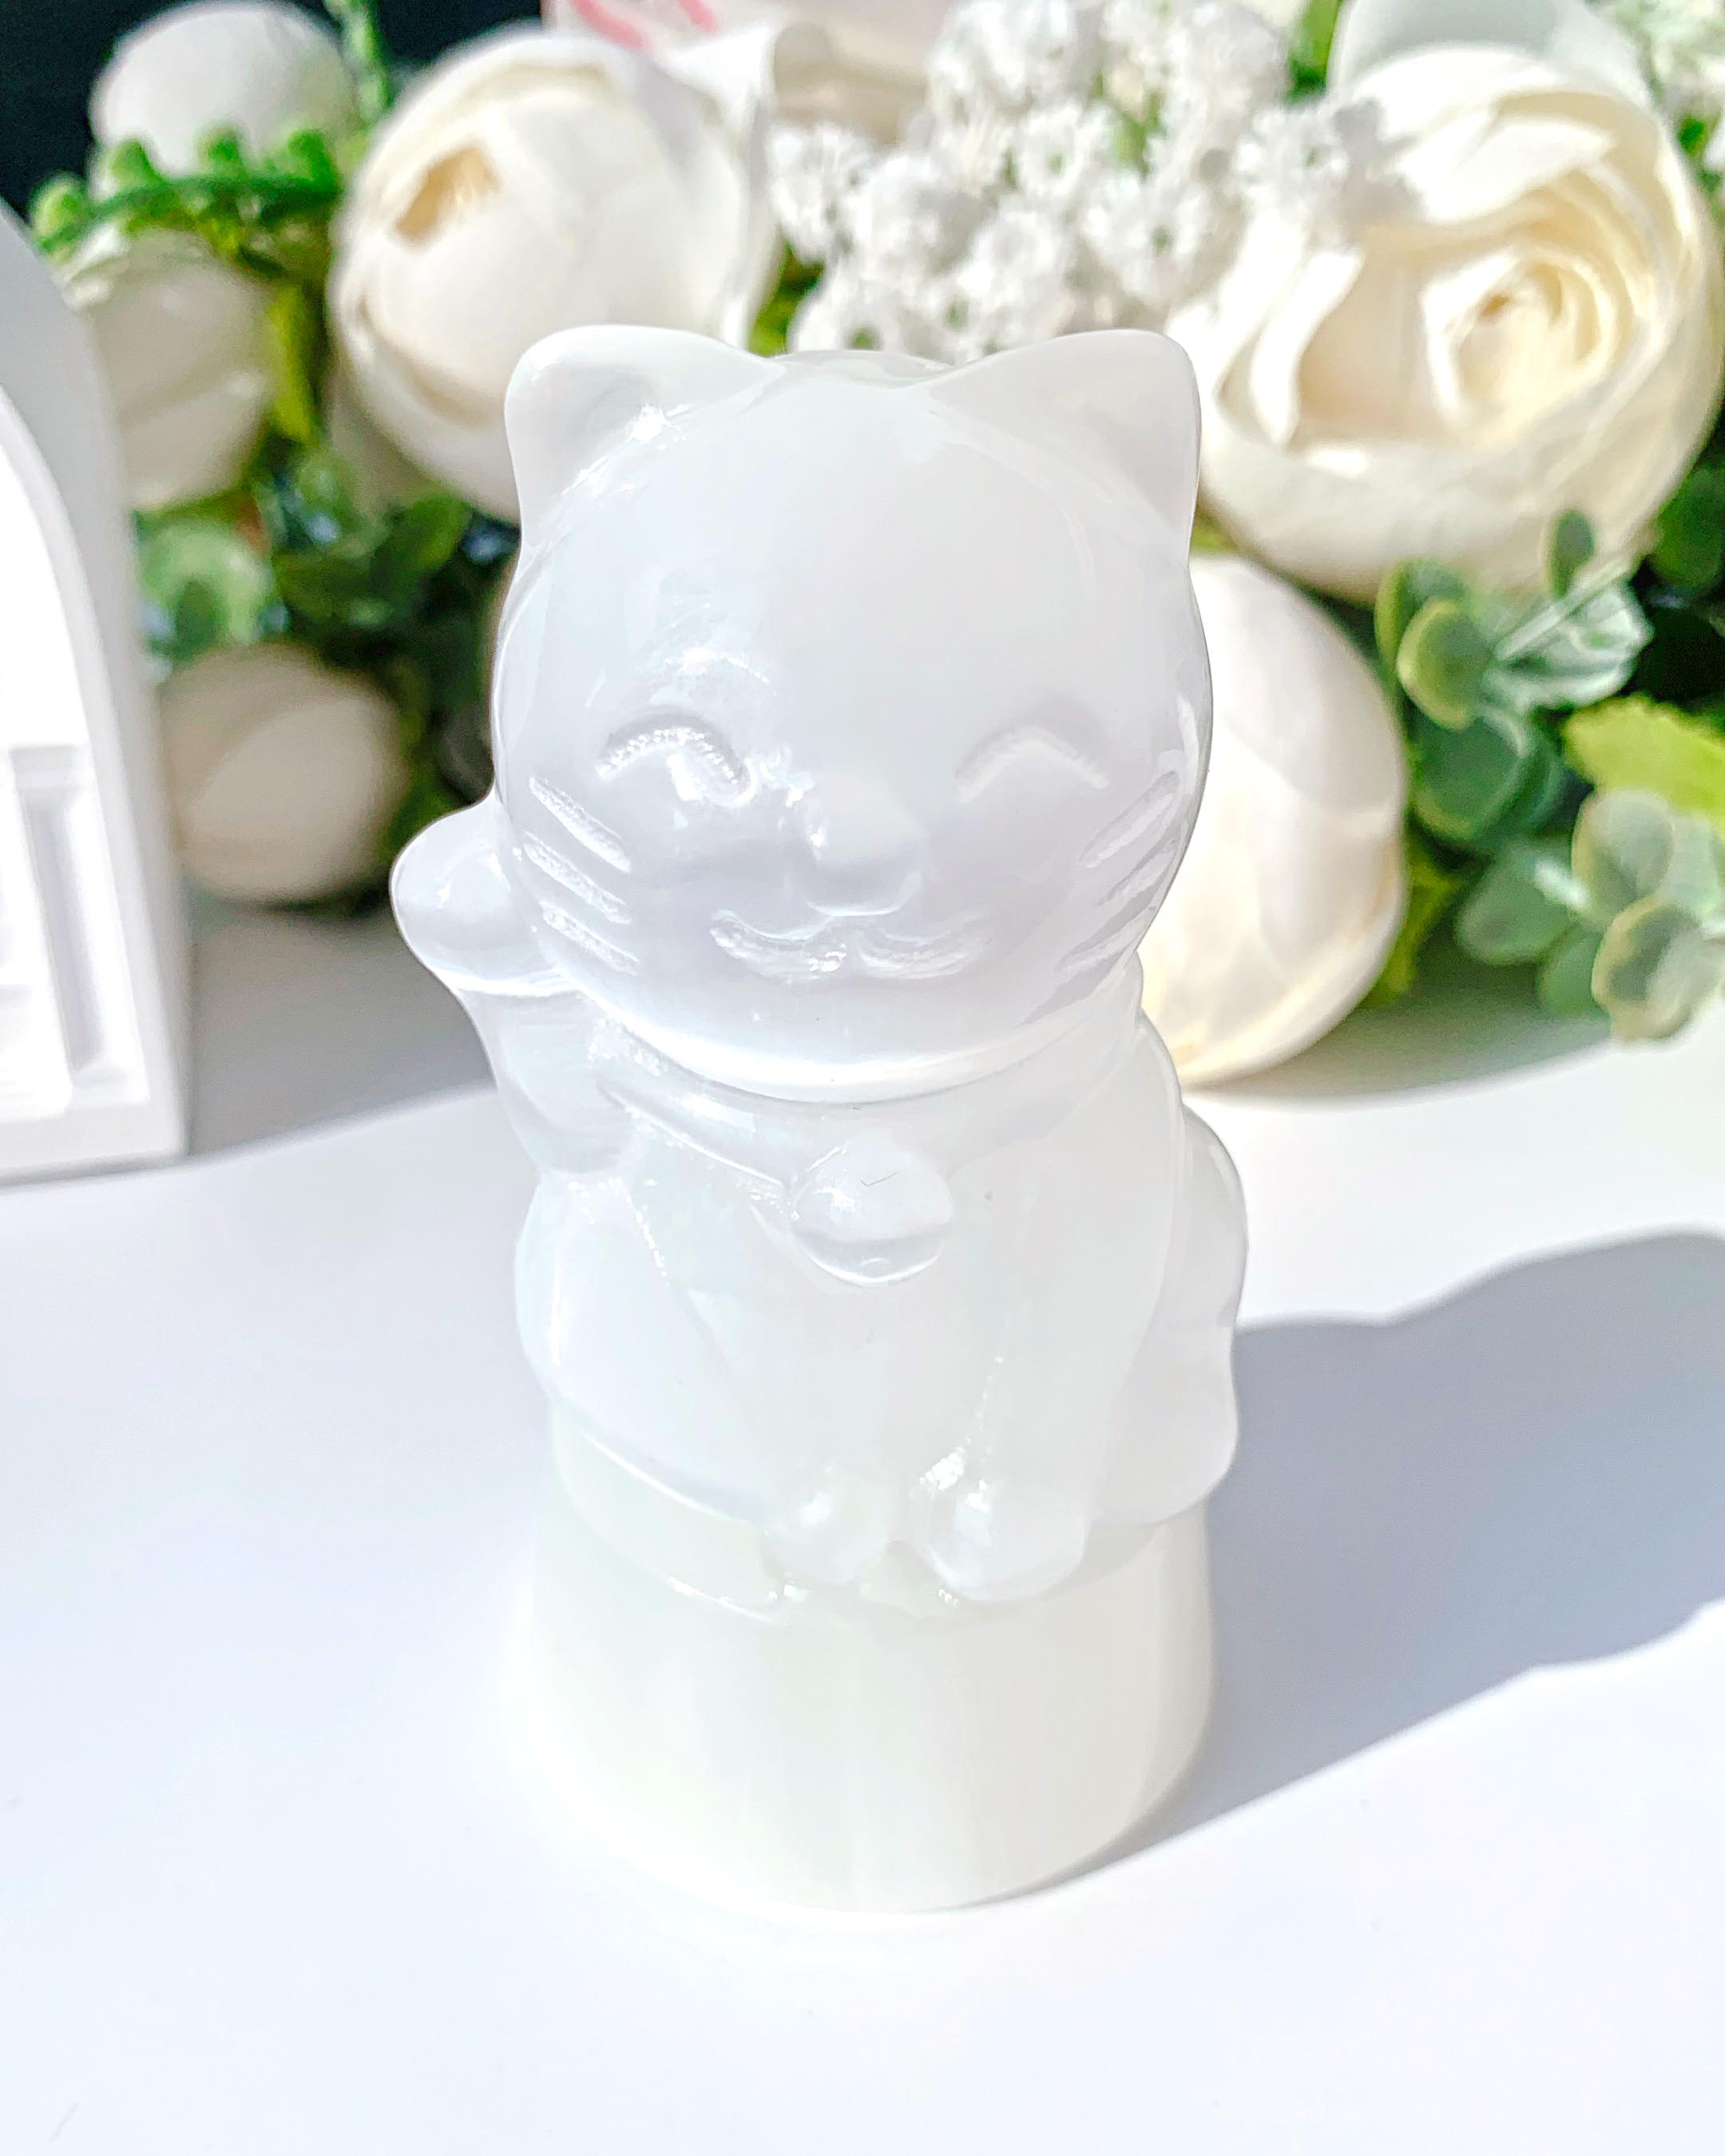 Lucky cat see-through plaster ornament